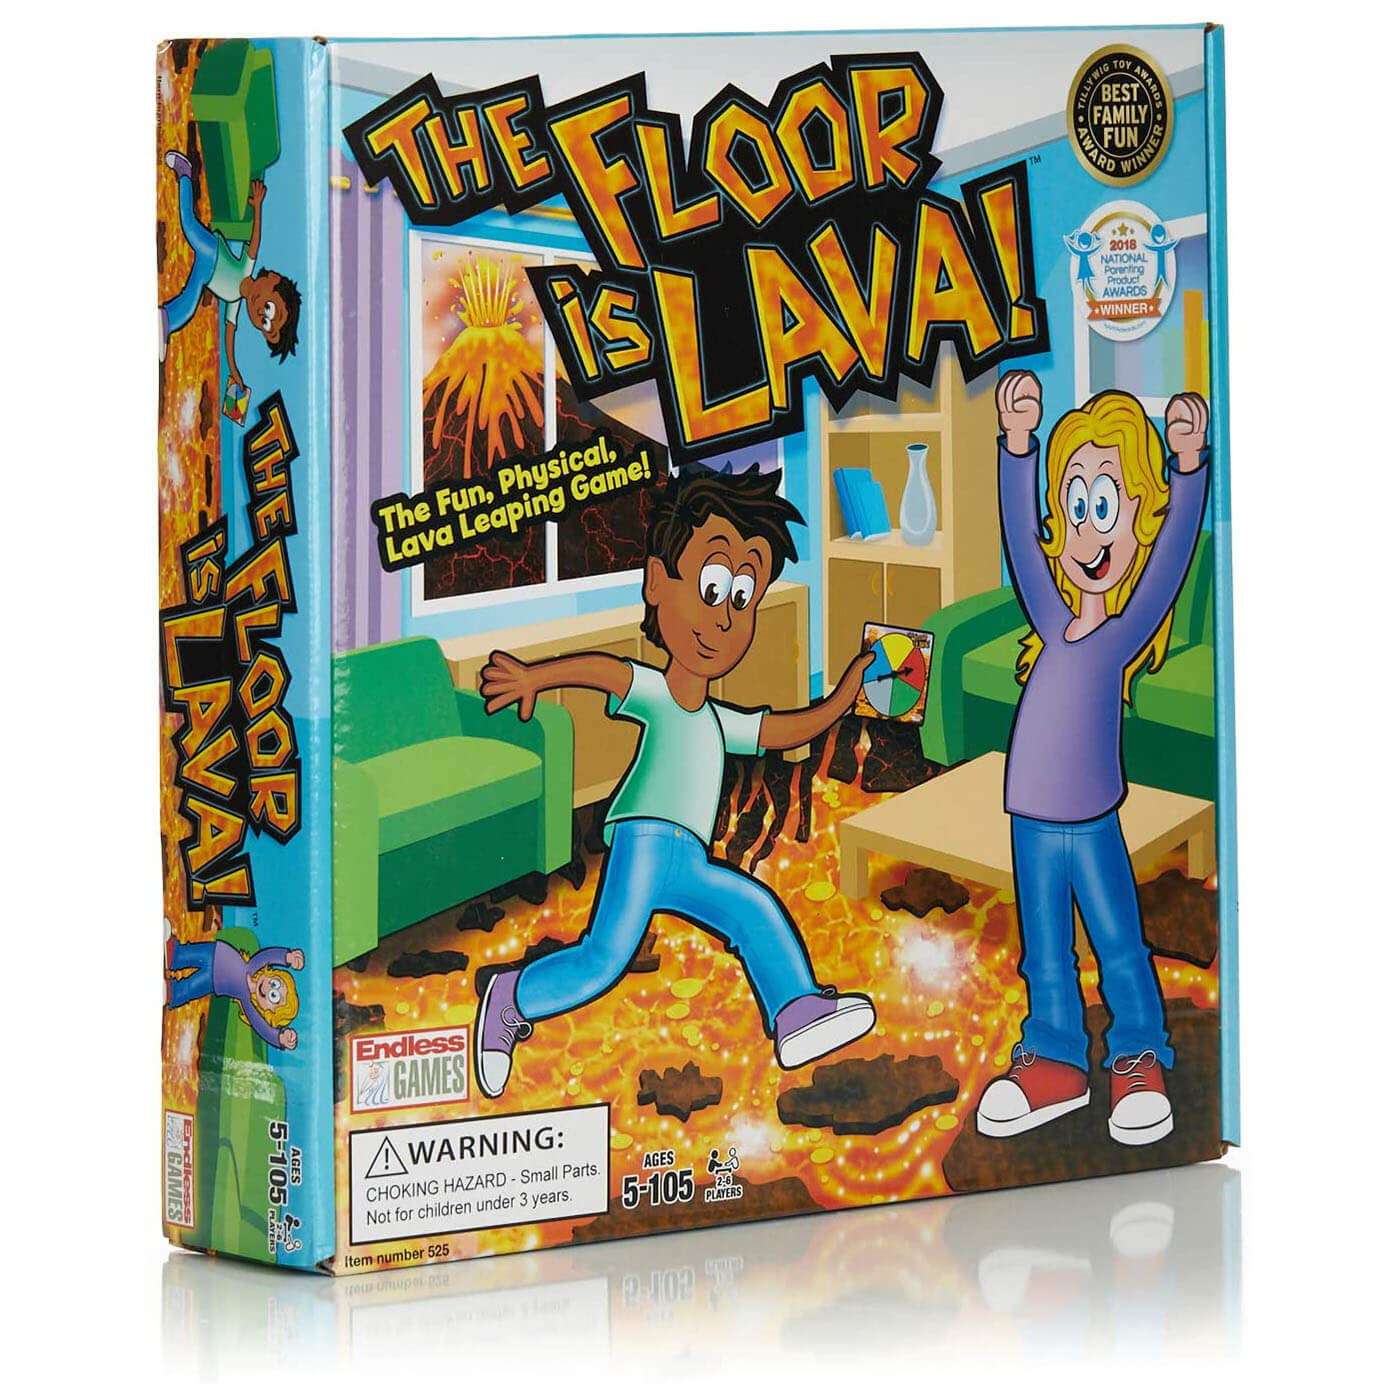 Endless Games The Floor Is Lava Game